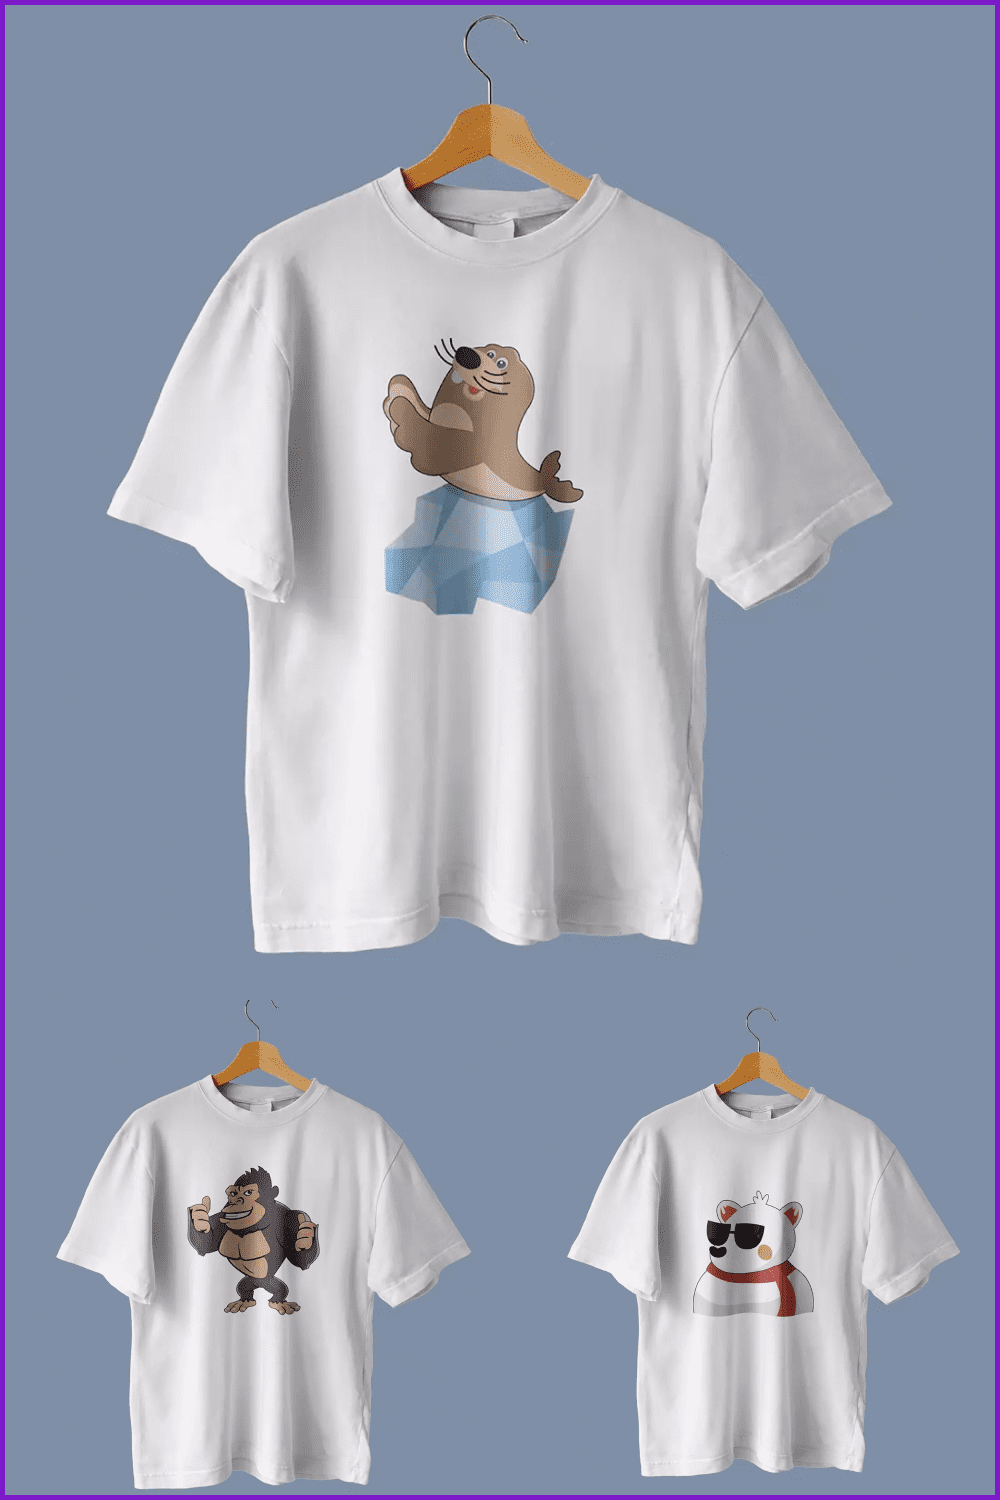 Animal T-shirt Collections.